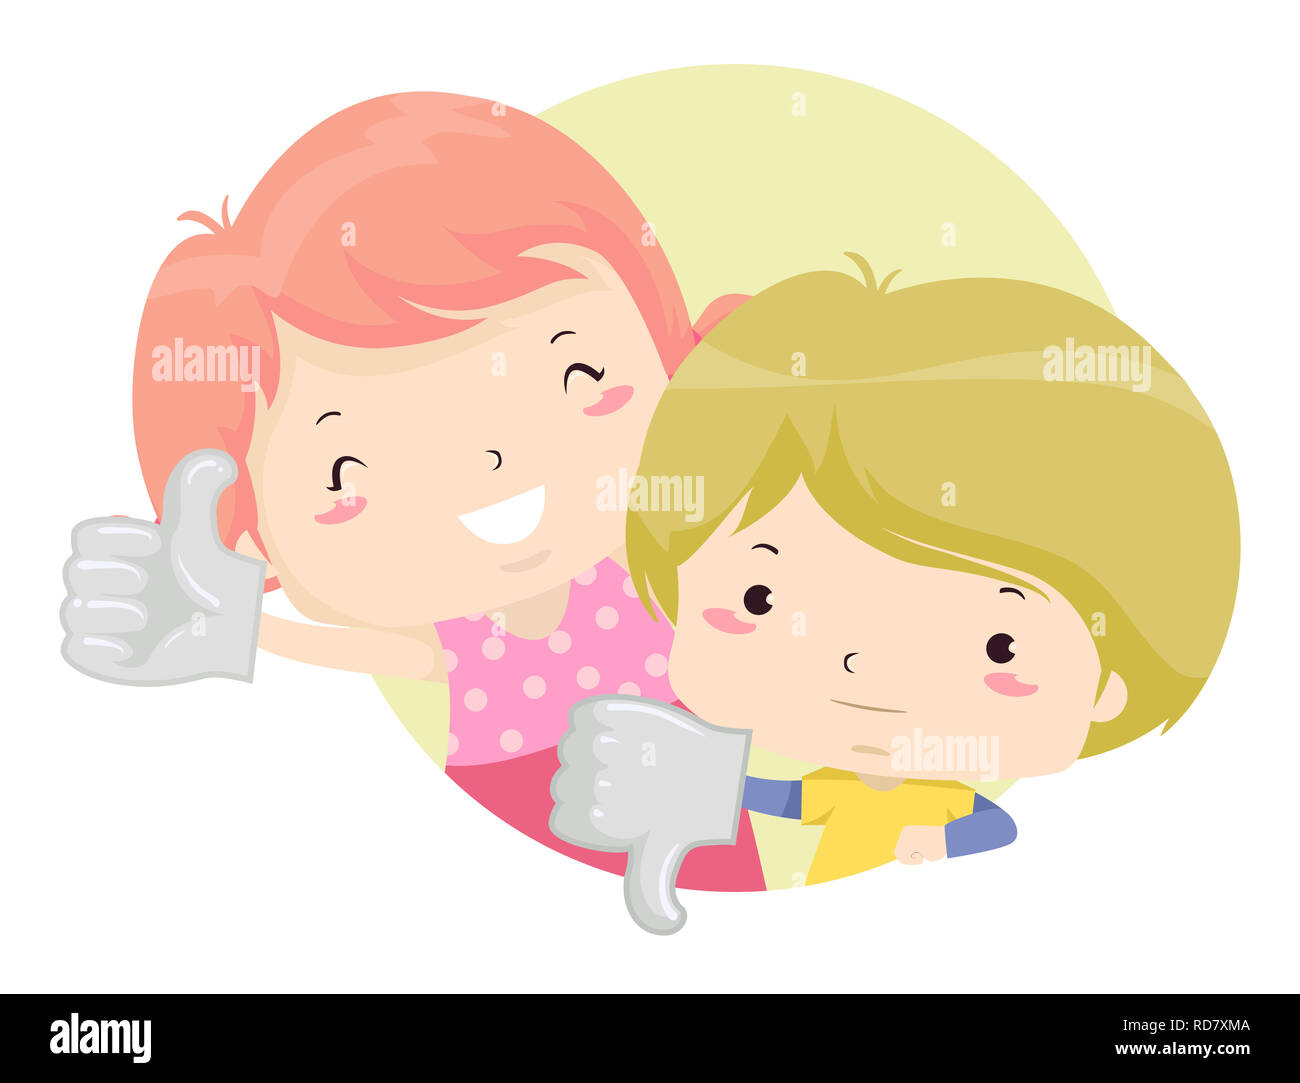 Illustration of Kids Showing Thumbs Up and Thumbs Down Stock Photo